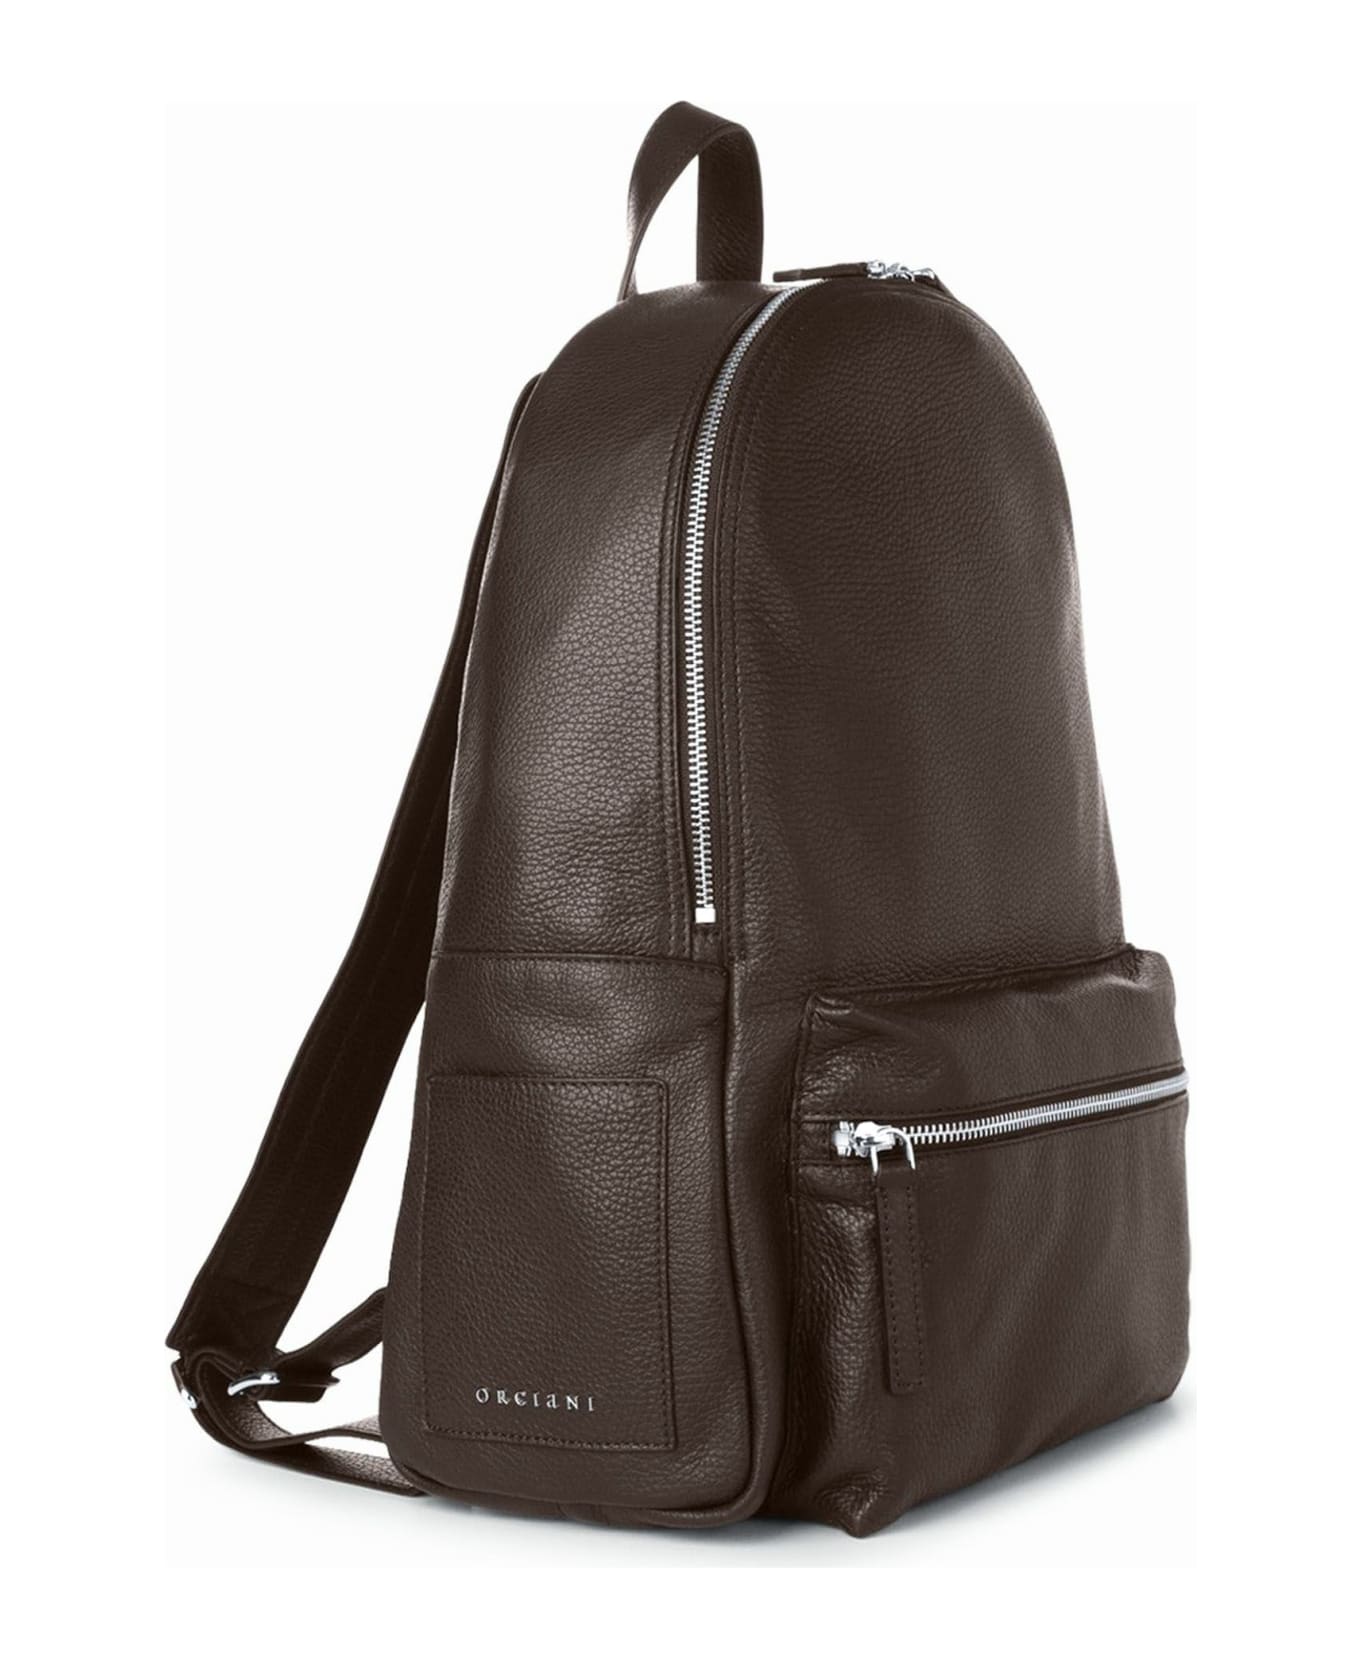 Orciani Brown Calf Leather Micron Backpack - Brown